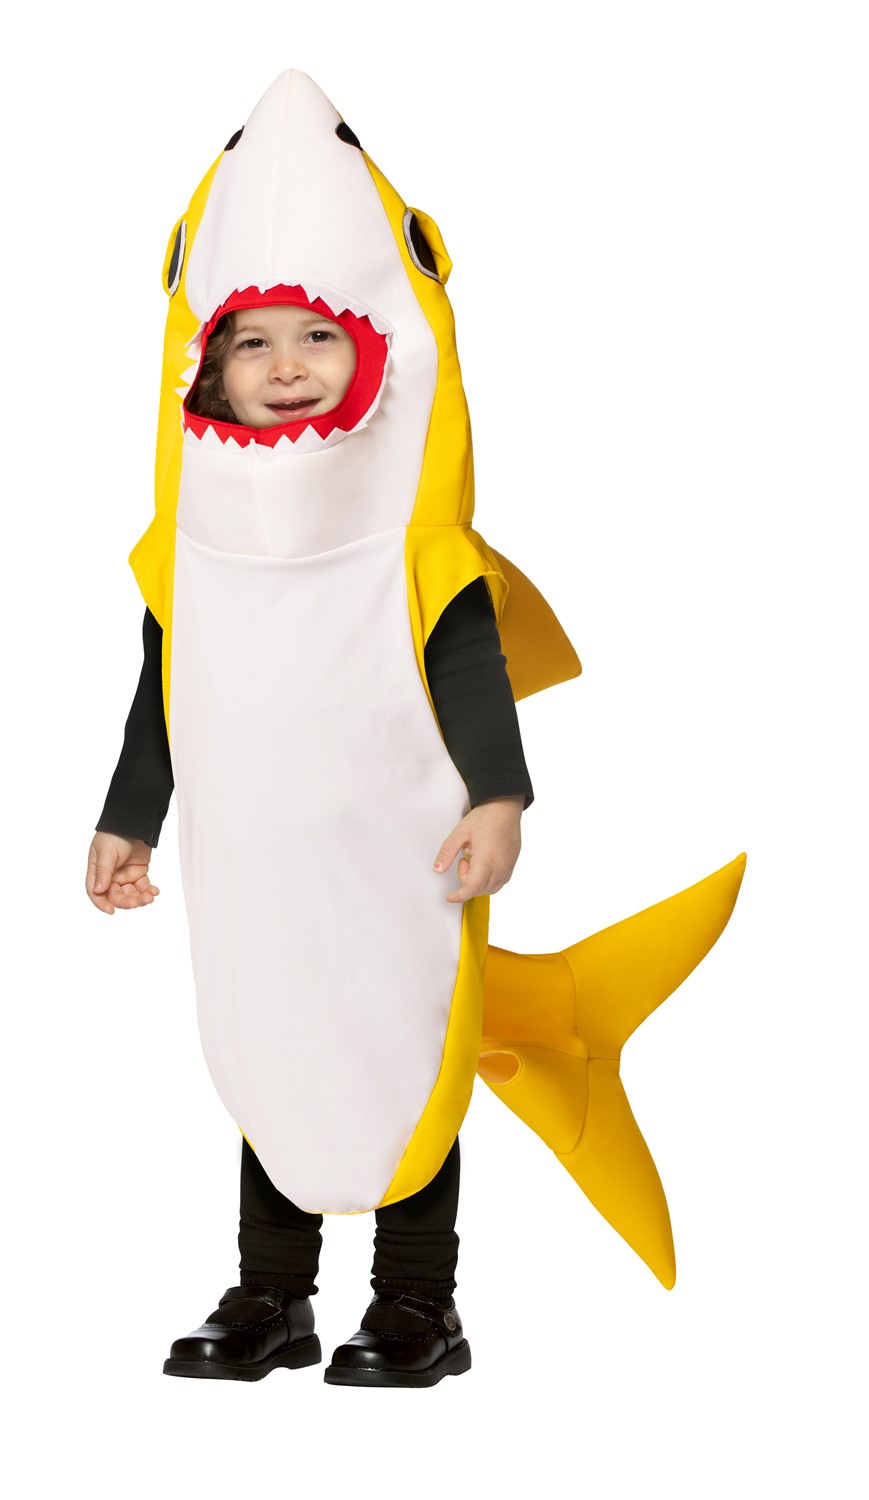 Toddler Baby Shark Daddy Shark Costume with Sound